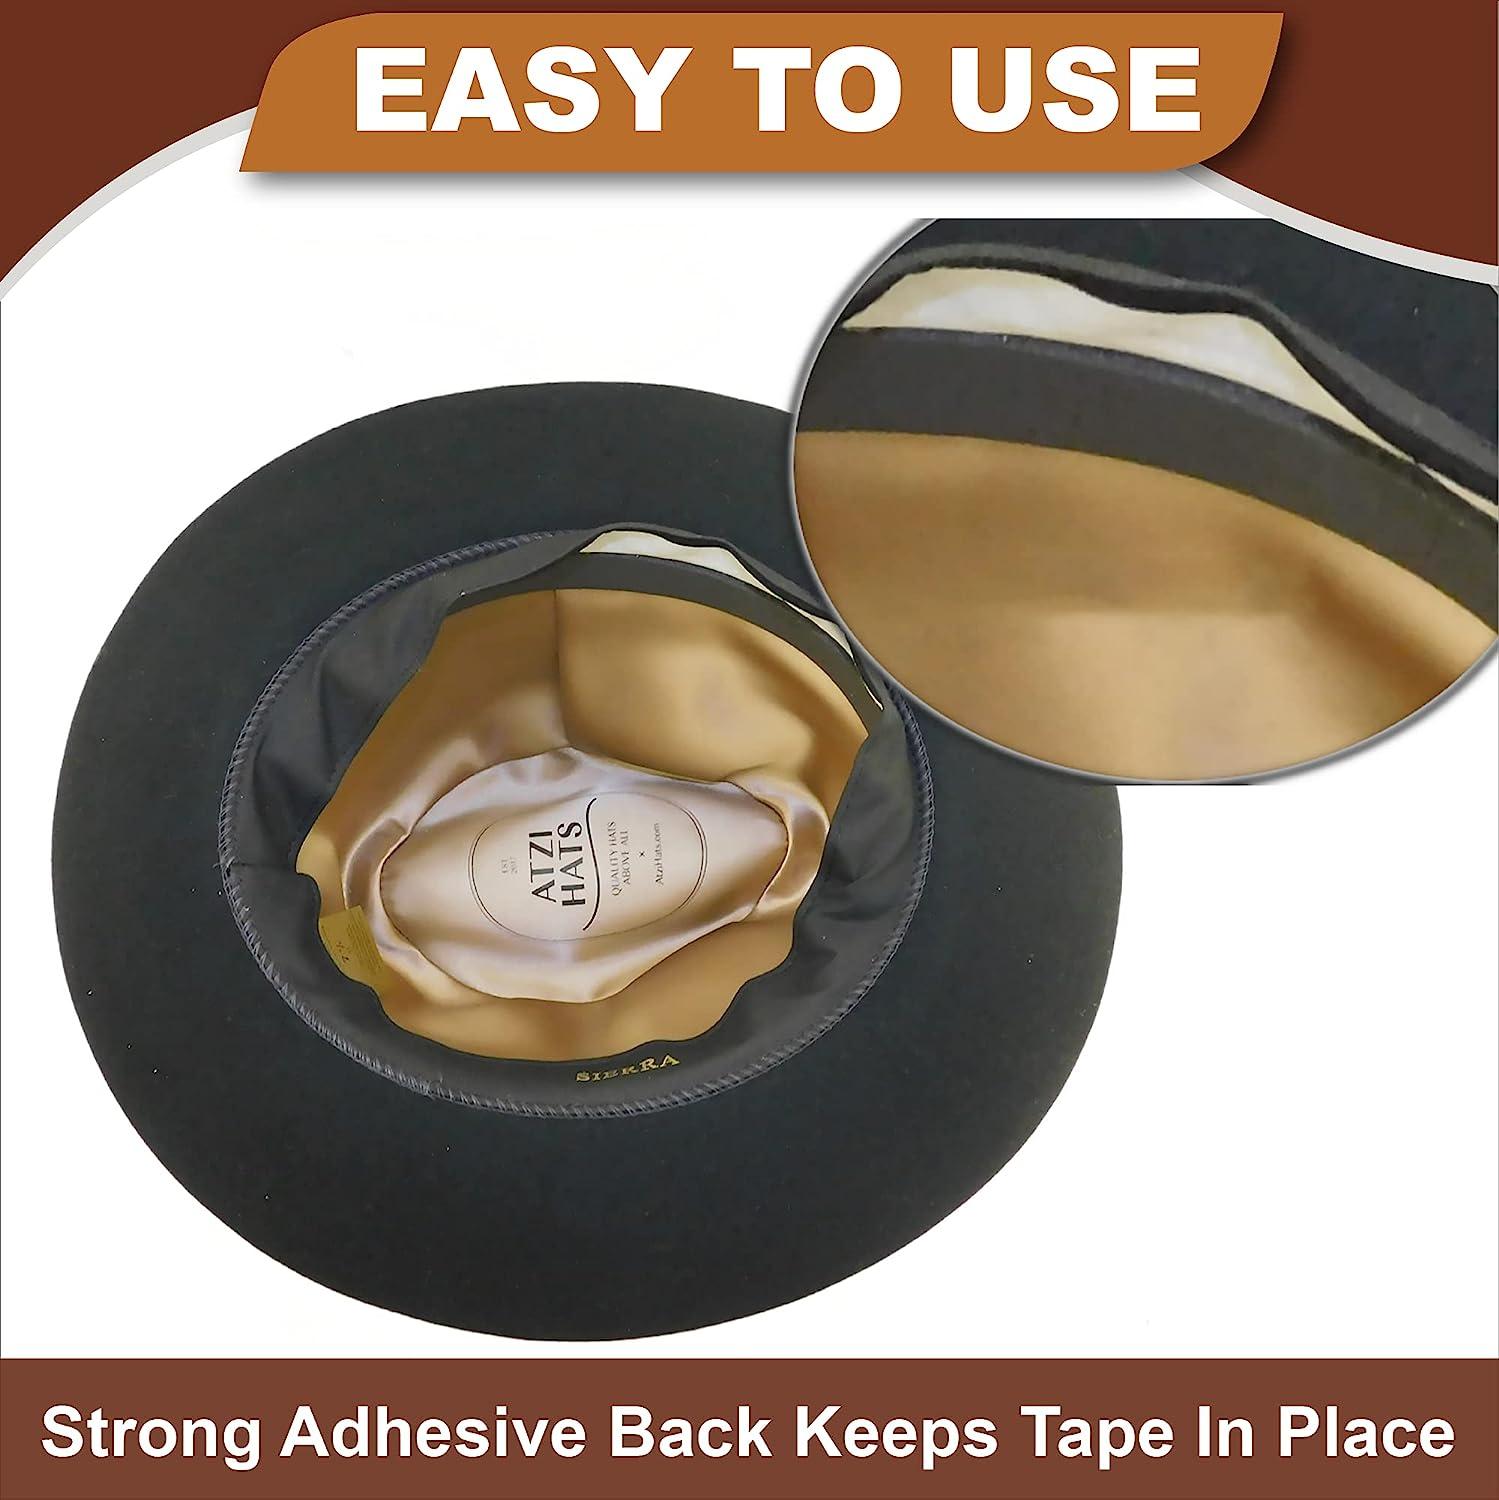 Made in the USA - Hat Size Reducing Tape 100 ft - Western Express